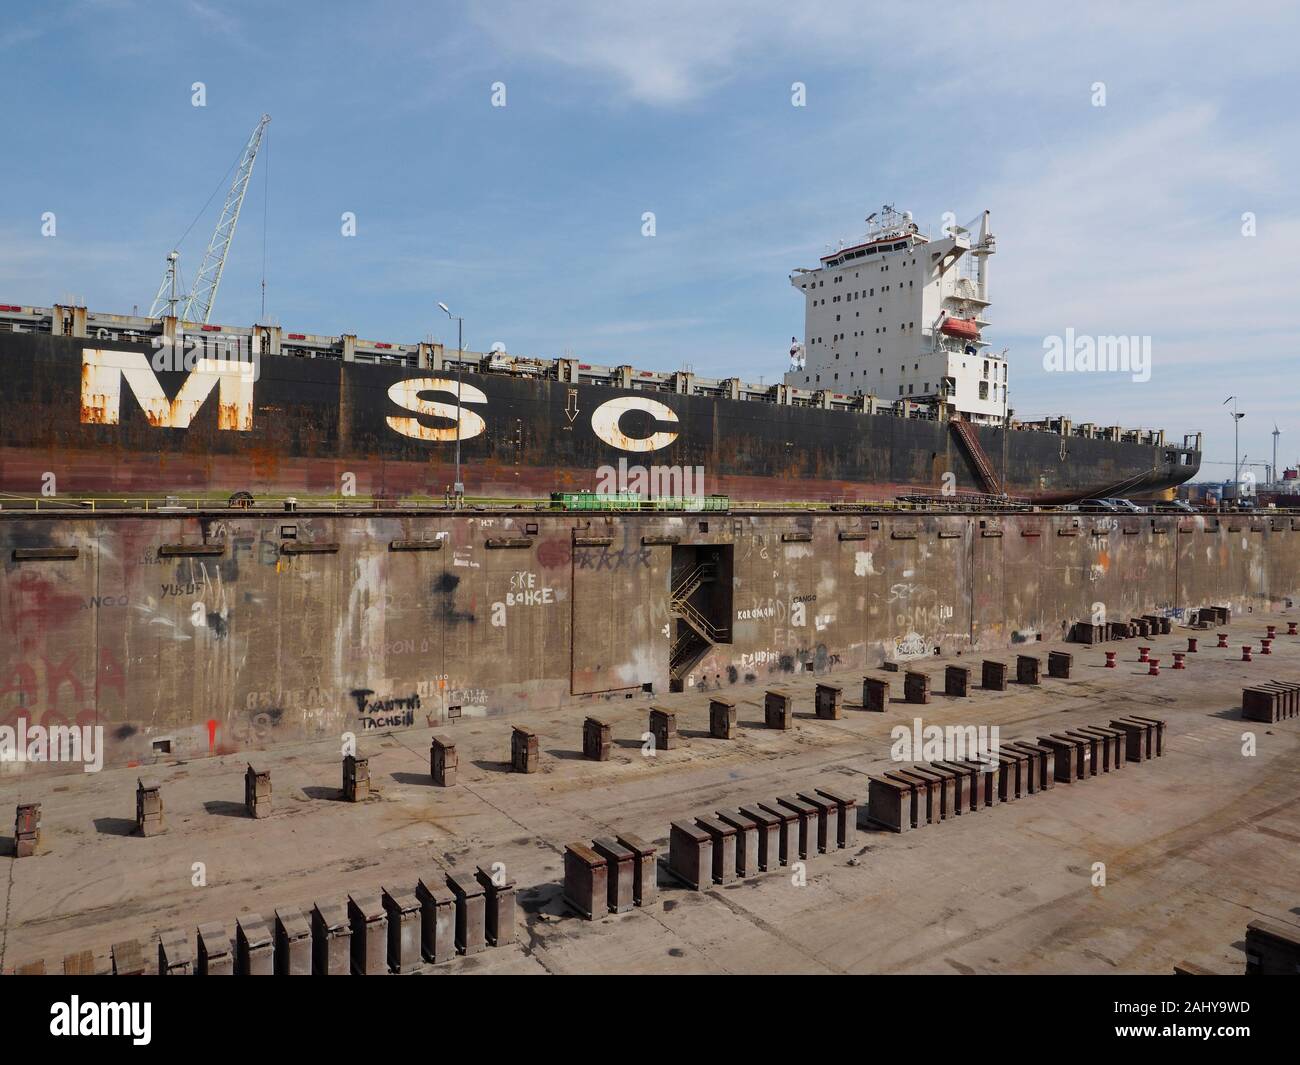 Large oil tanker ship next to a drained dry dock in the port of Antwerp, Belgium Stock Photo